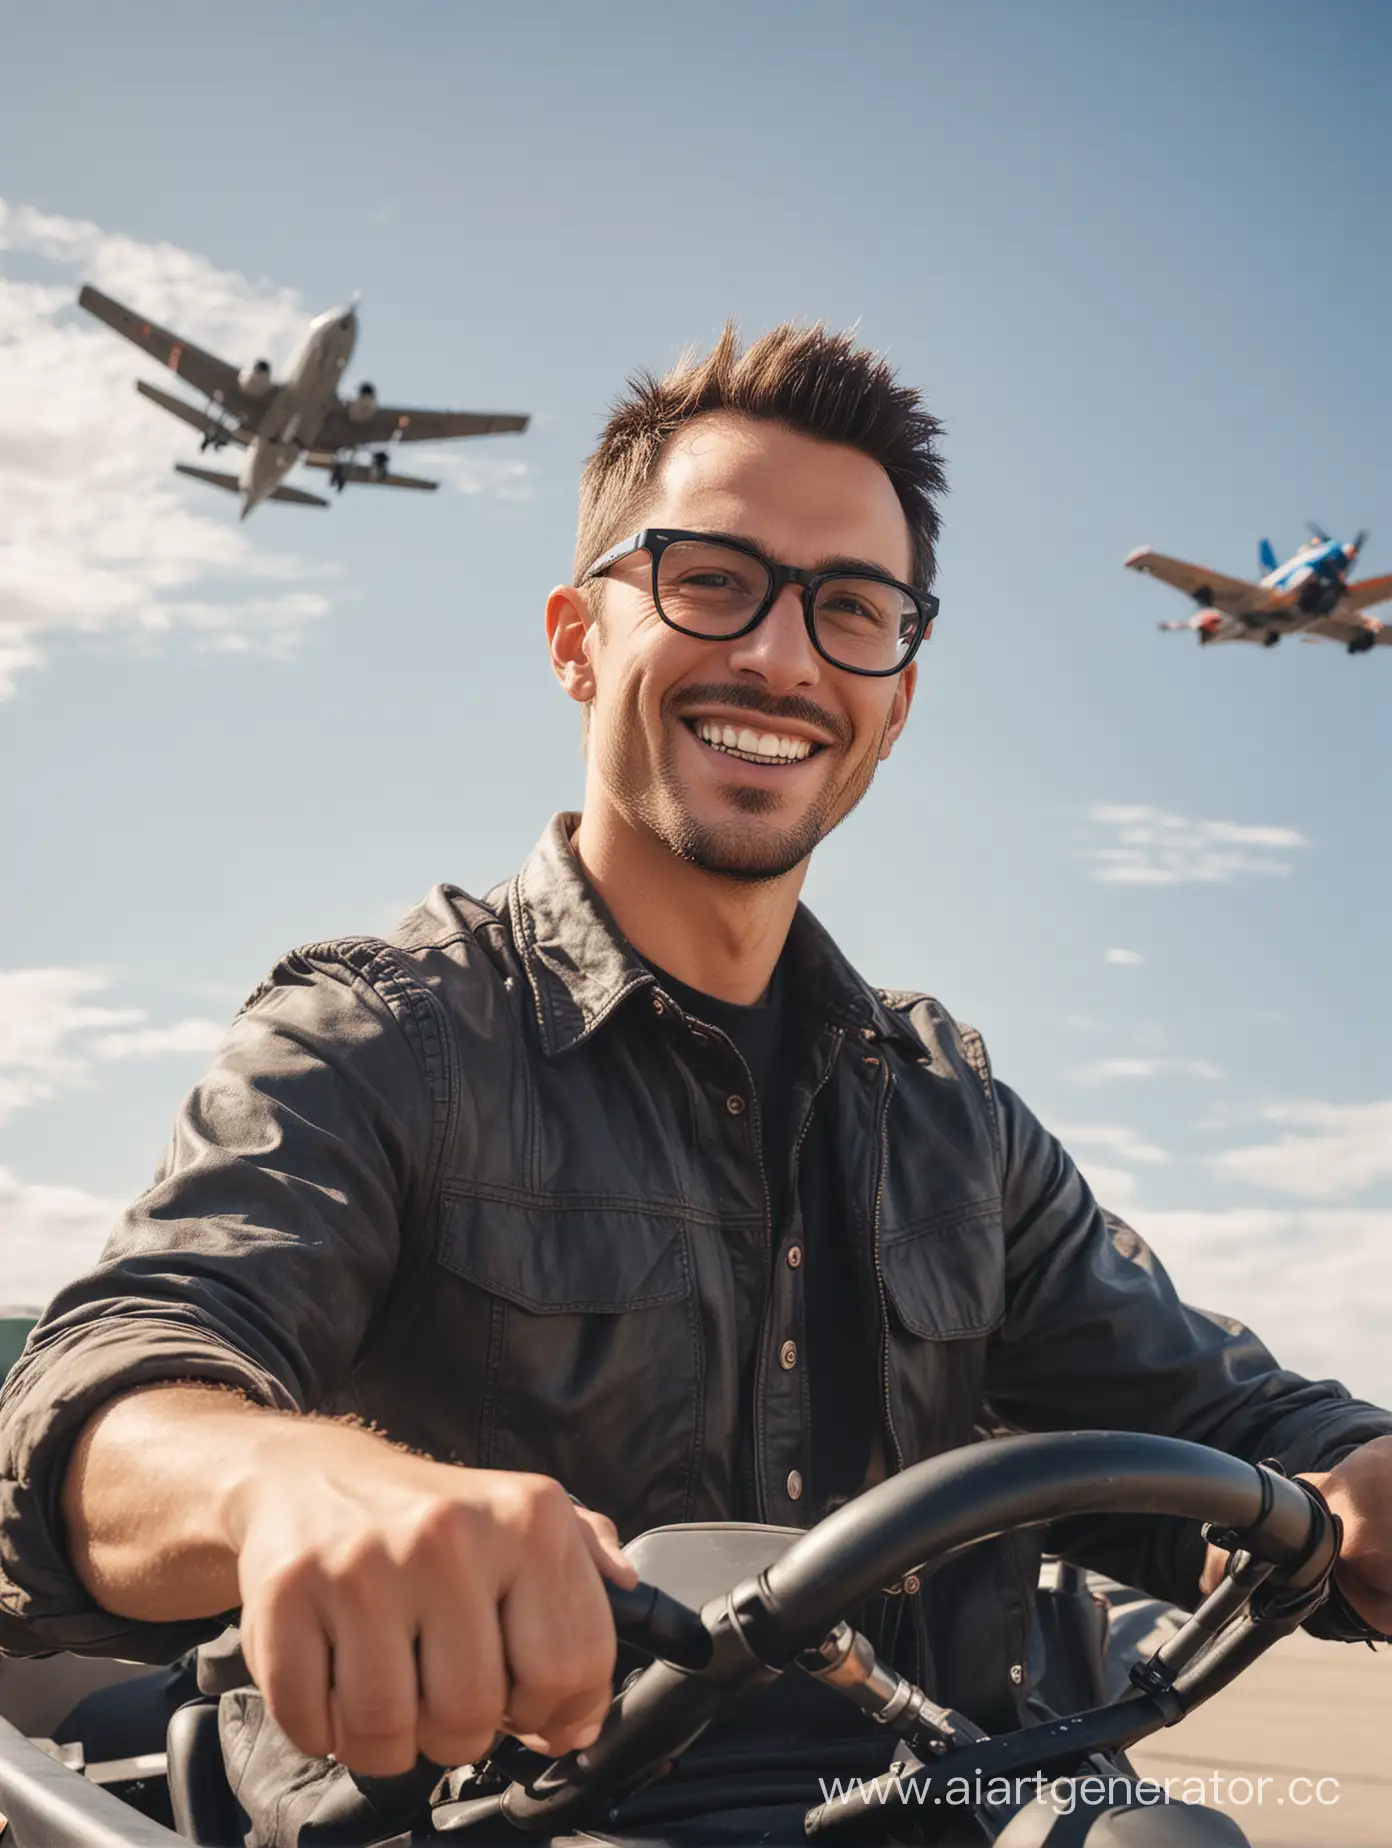 Man-with-Stubble-and-Glasses-Enjoying-GoKart-Ride-under-Airplane-Flyover